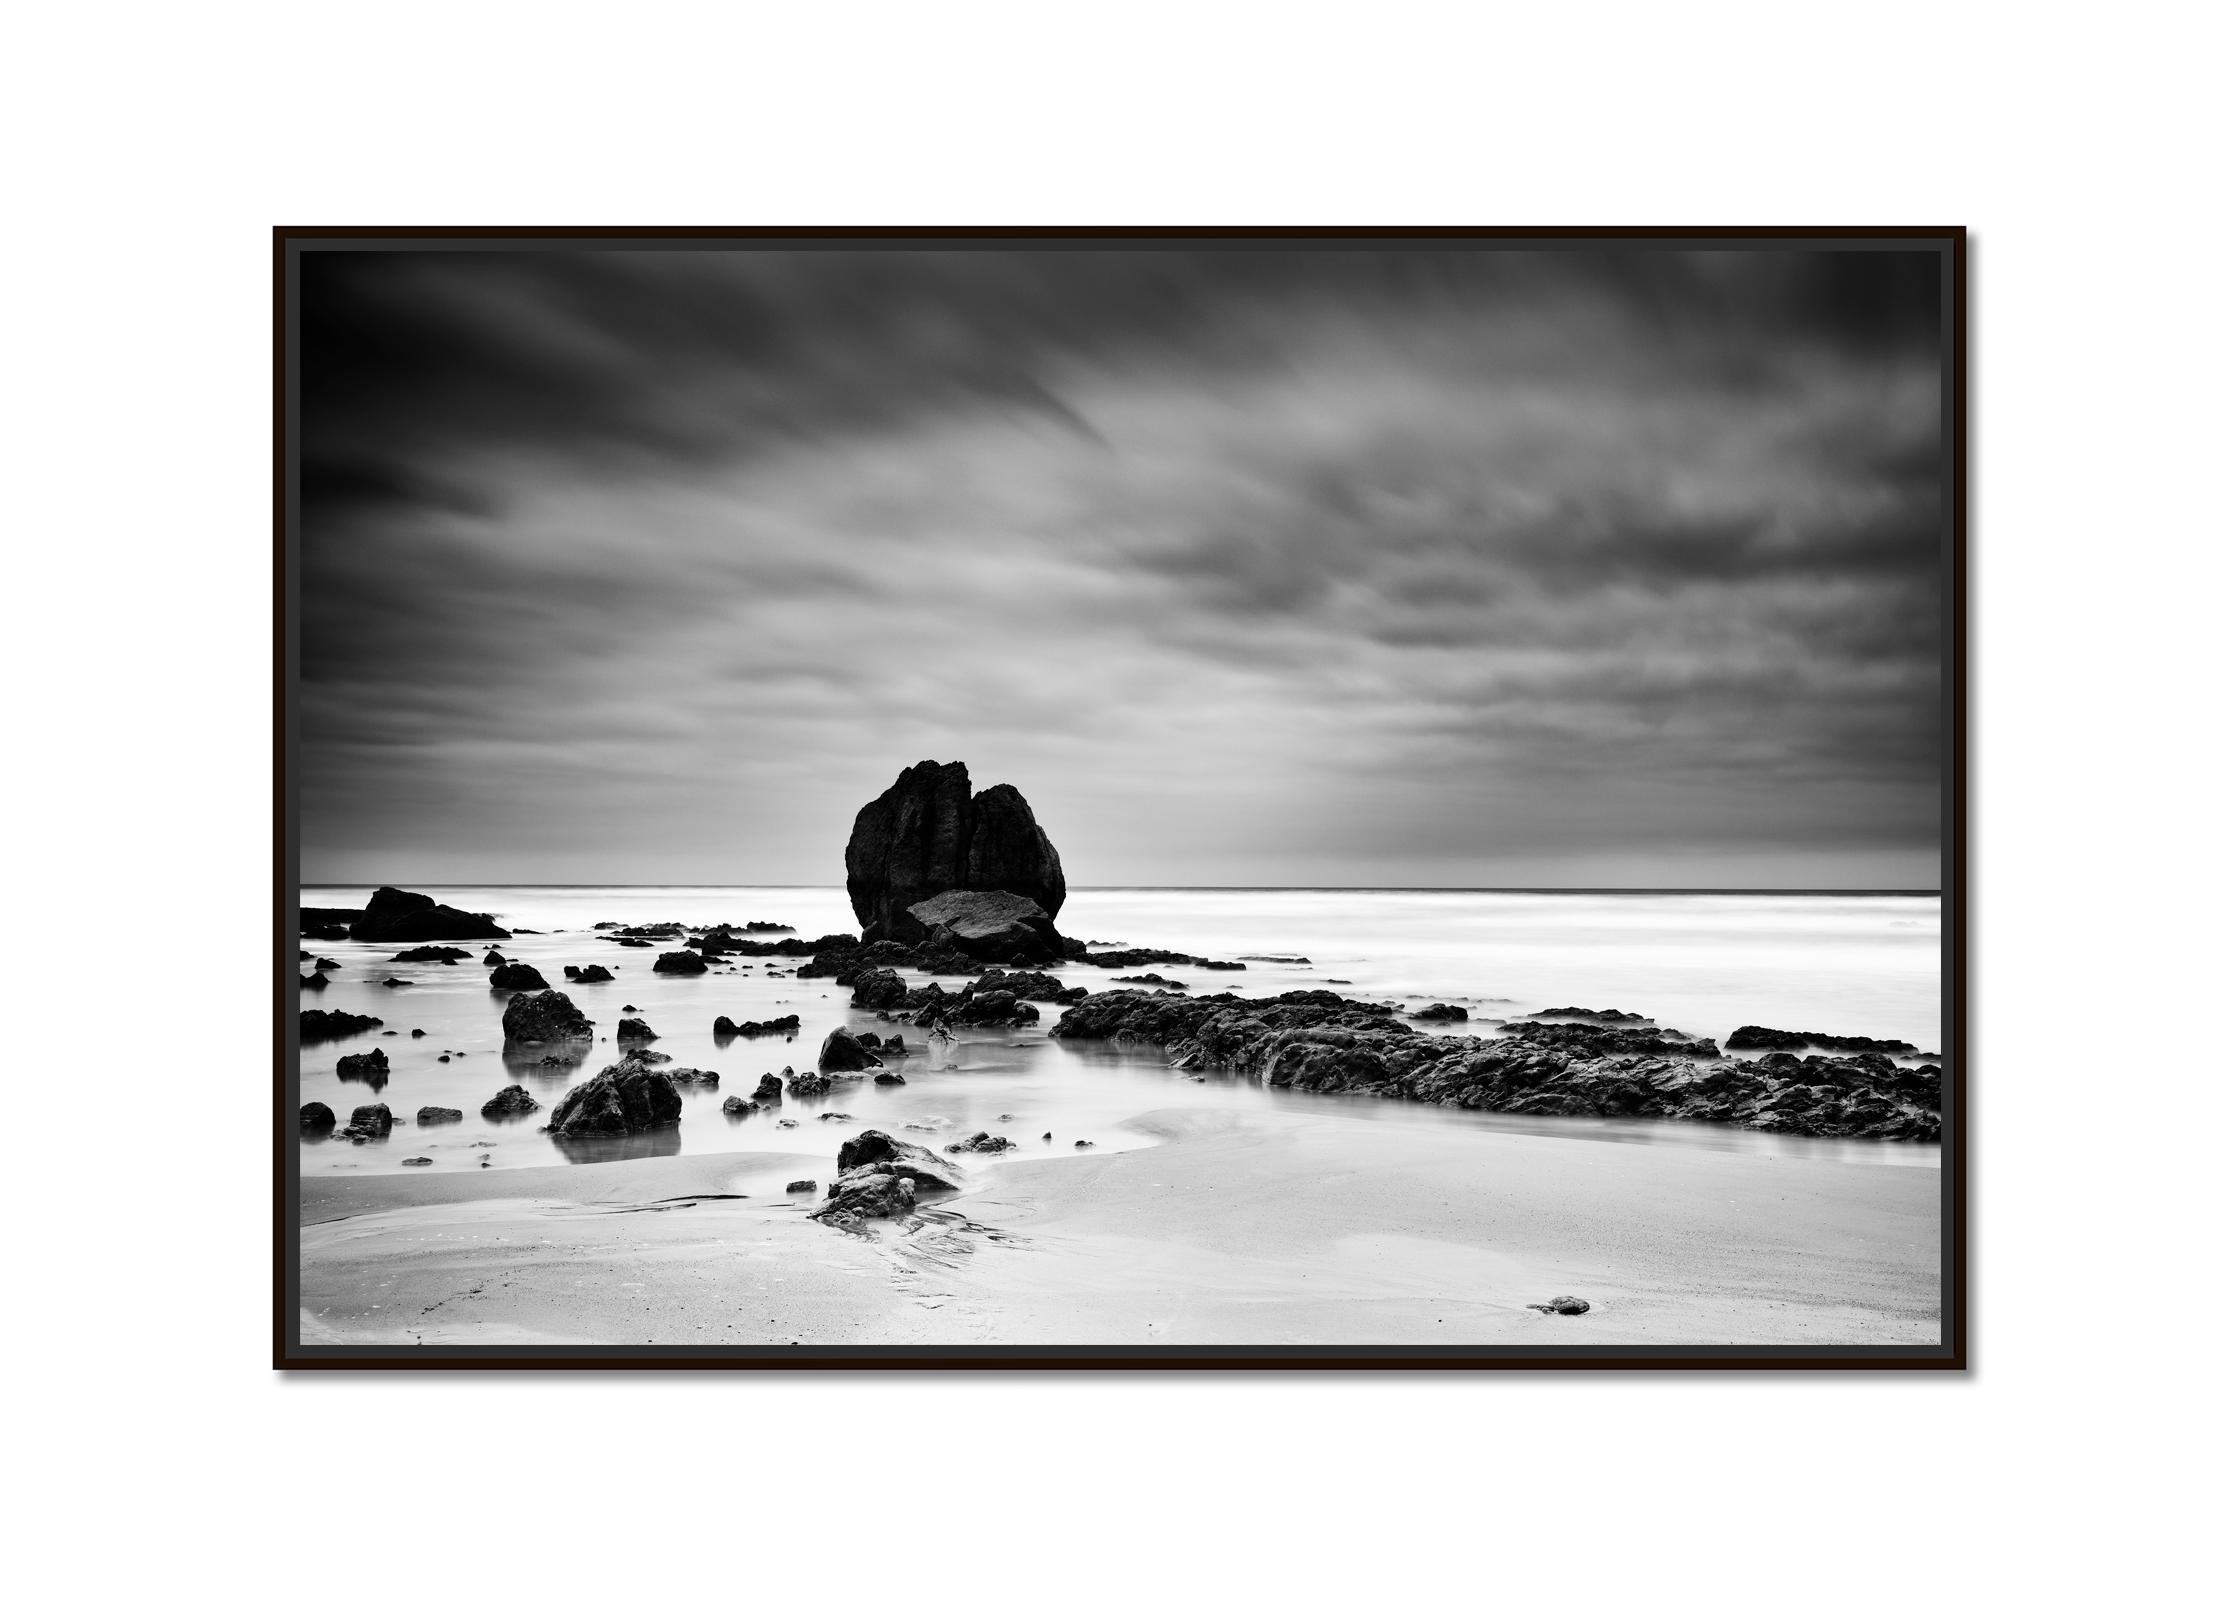 Rocks on the Shore, beach, Atlantic Coast, France, black and white landscape  - Photograph by Gerald Berghammer